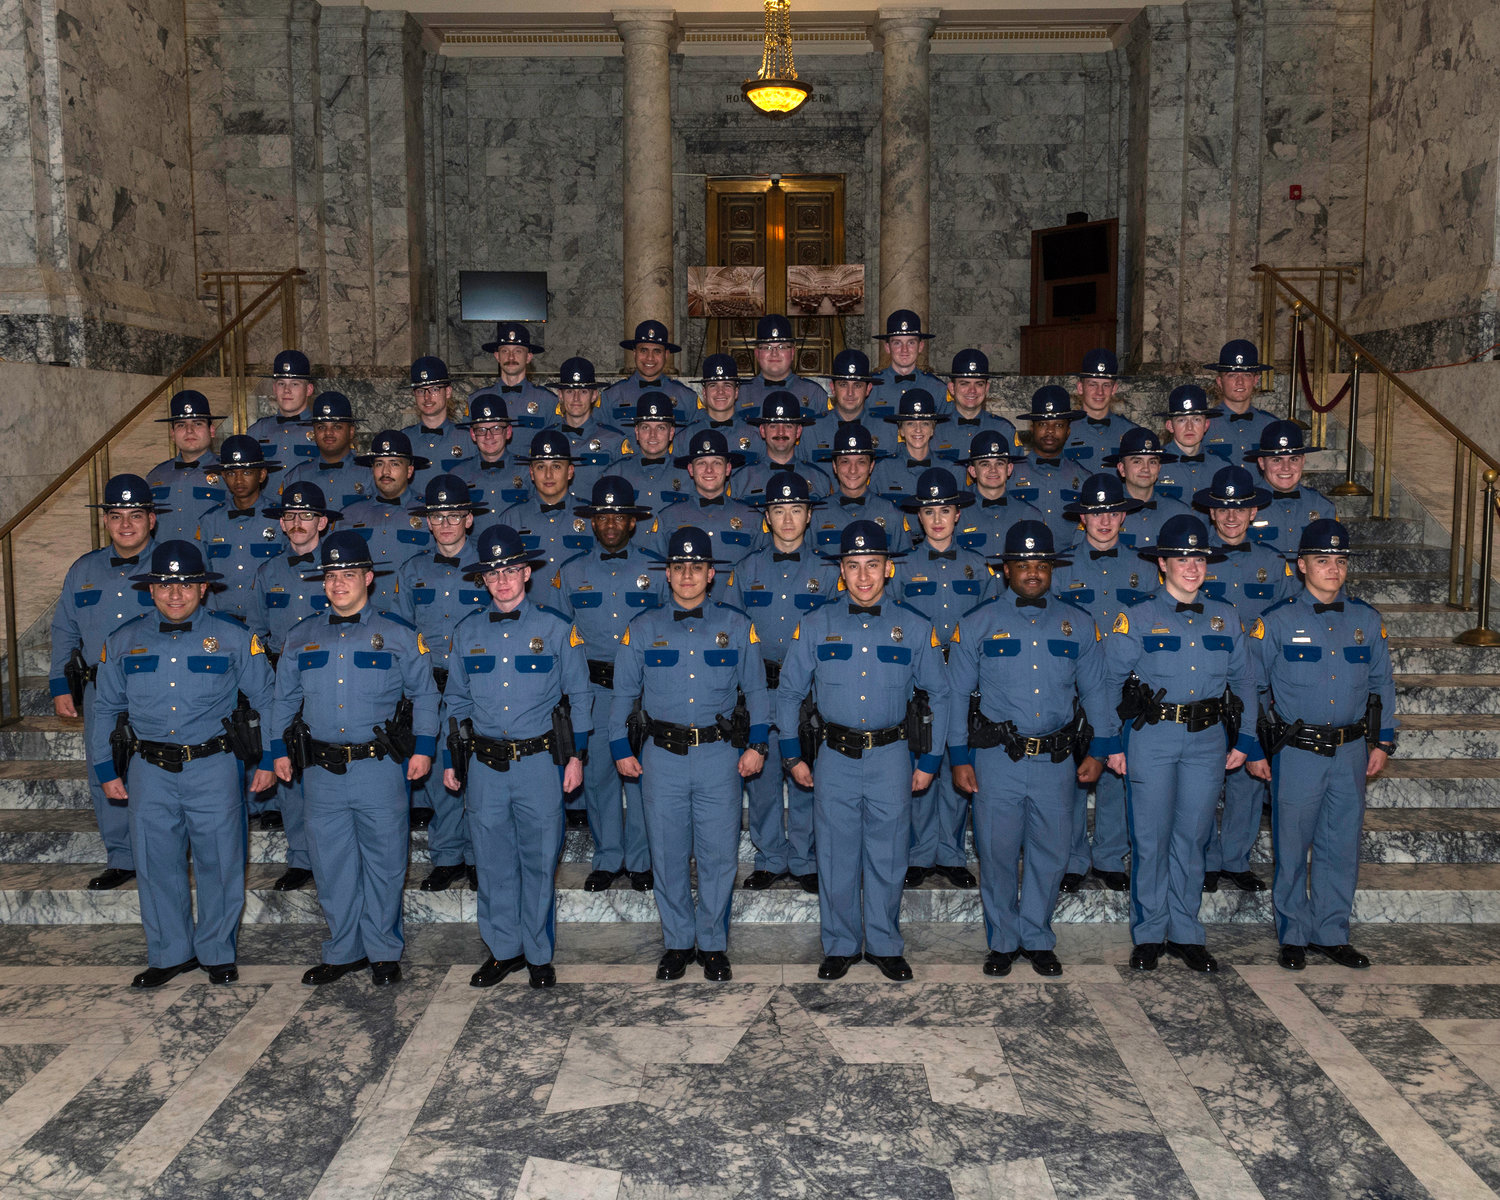 The Washington State Patrol introduced 44 newly commissioned troopers to its ranks on Nov. 16  during the 116th Trooper Basic Training graduation ceremony held at the Capitol Rotunda in Olympia.